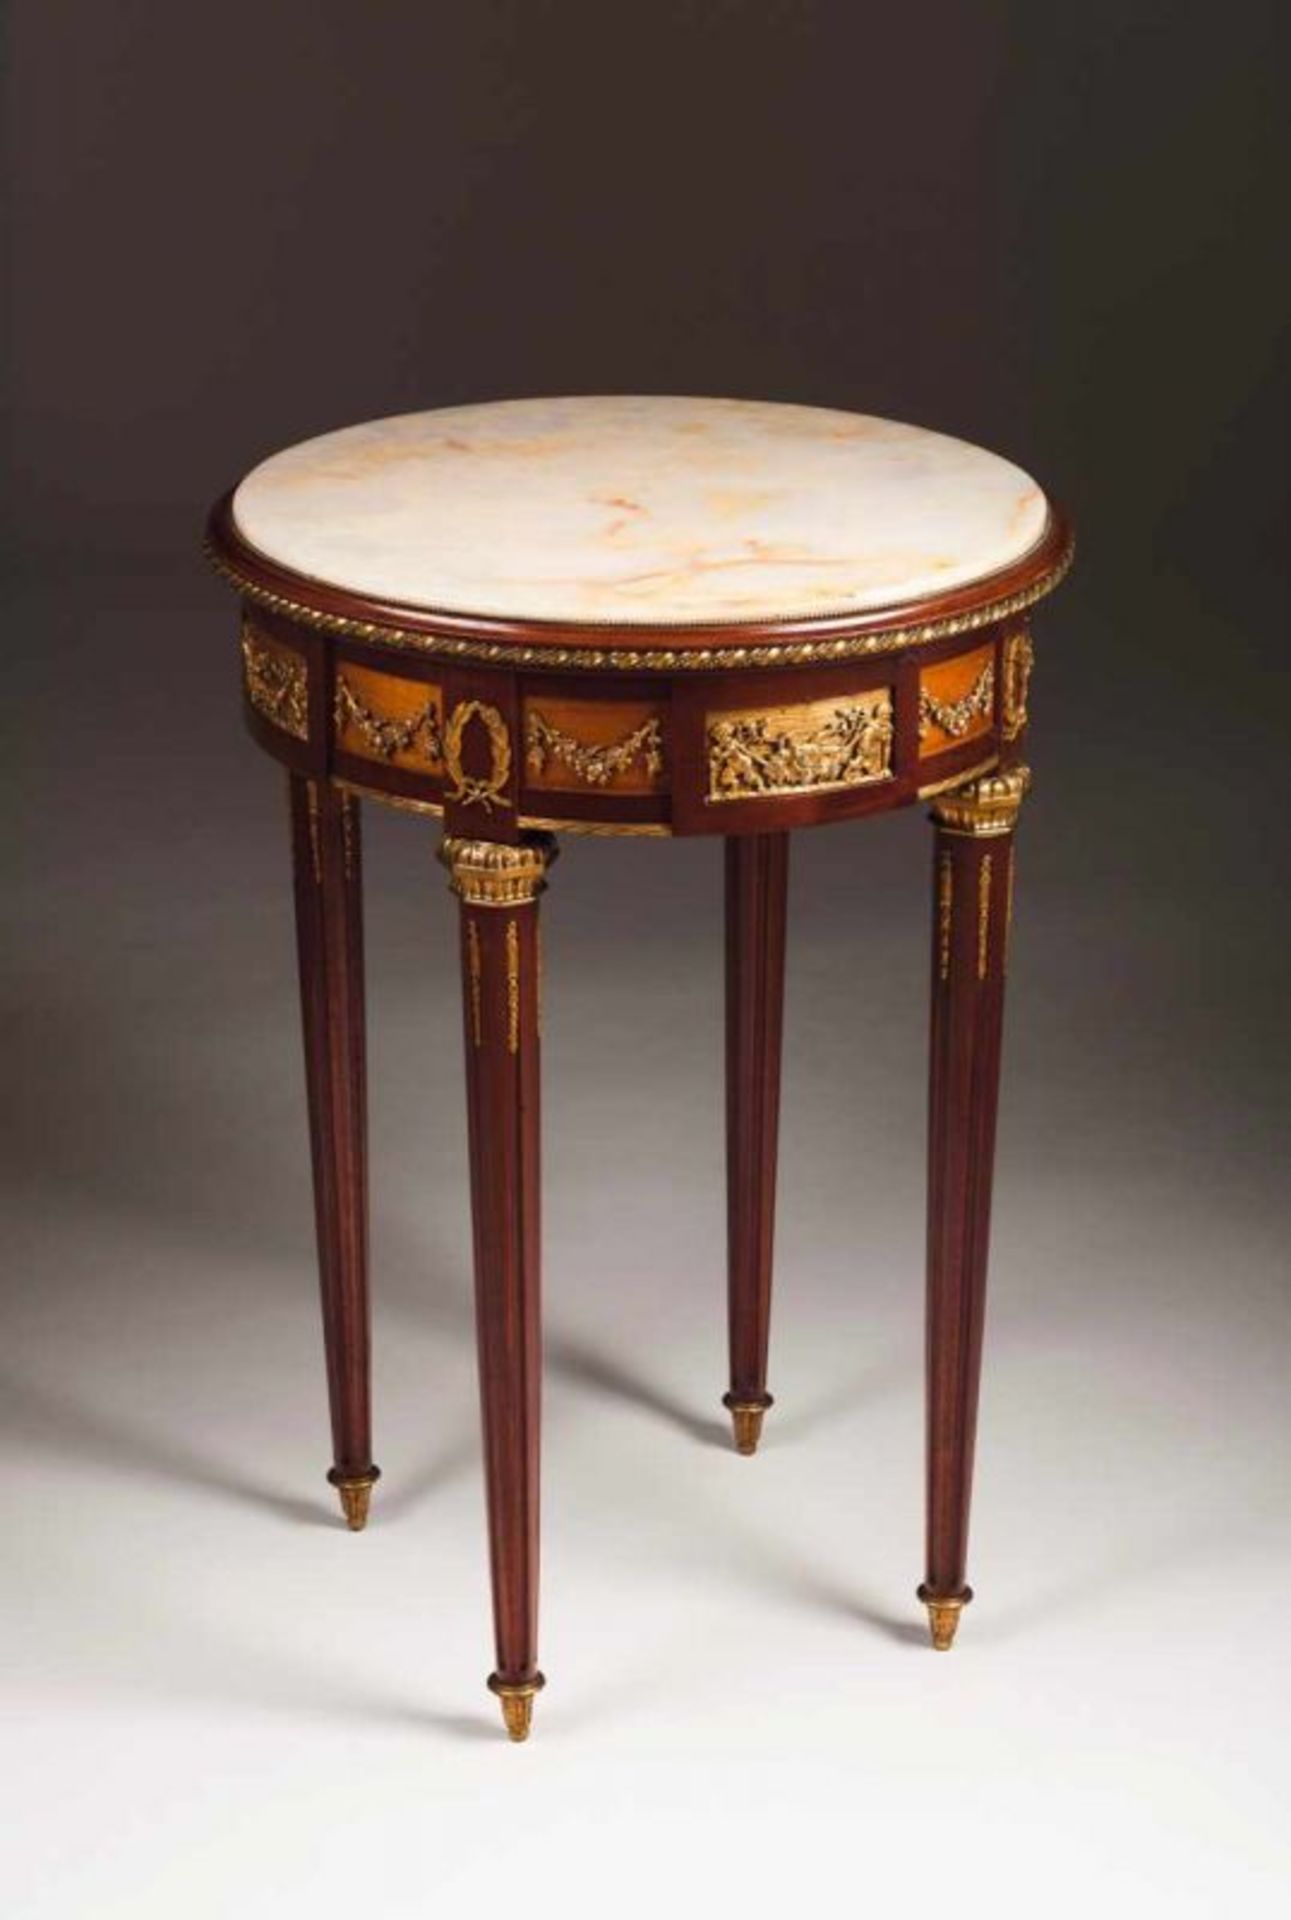 A Louis XVI style occasional table Mahogany and other woods Gilt bronze mounts with putti, garlands